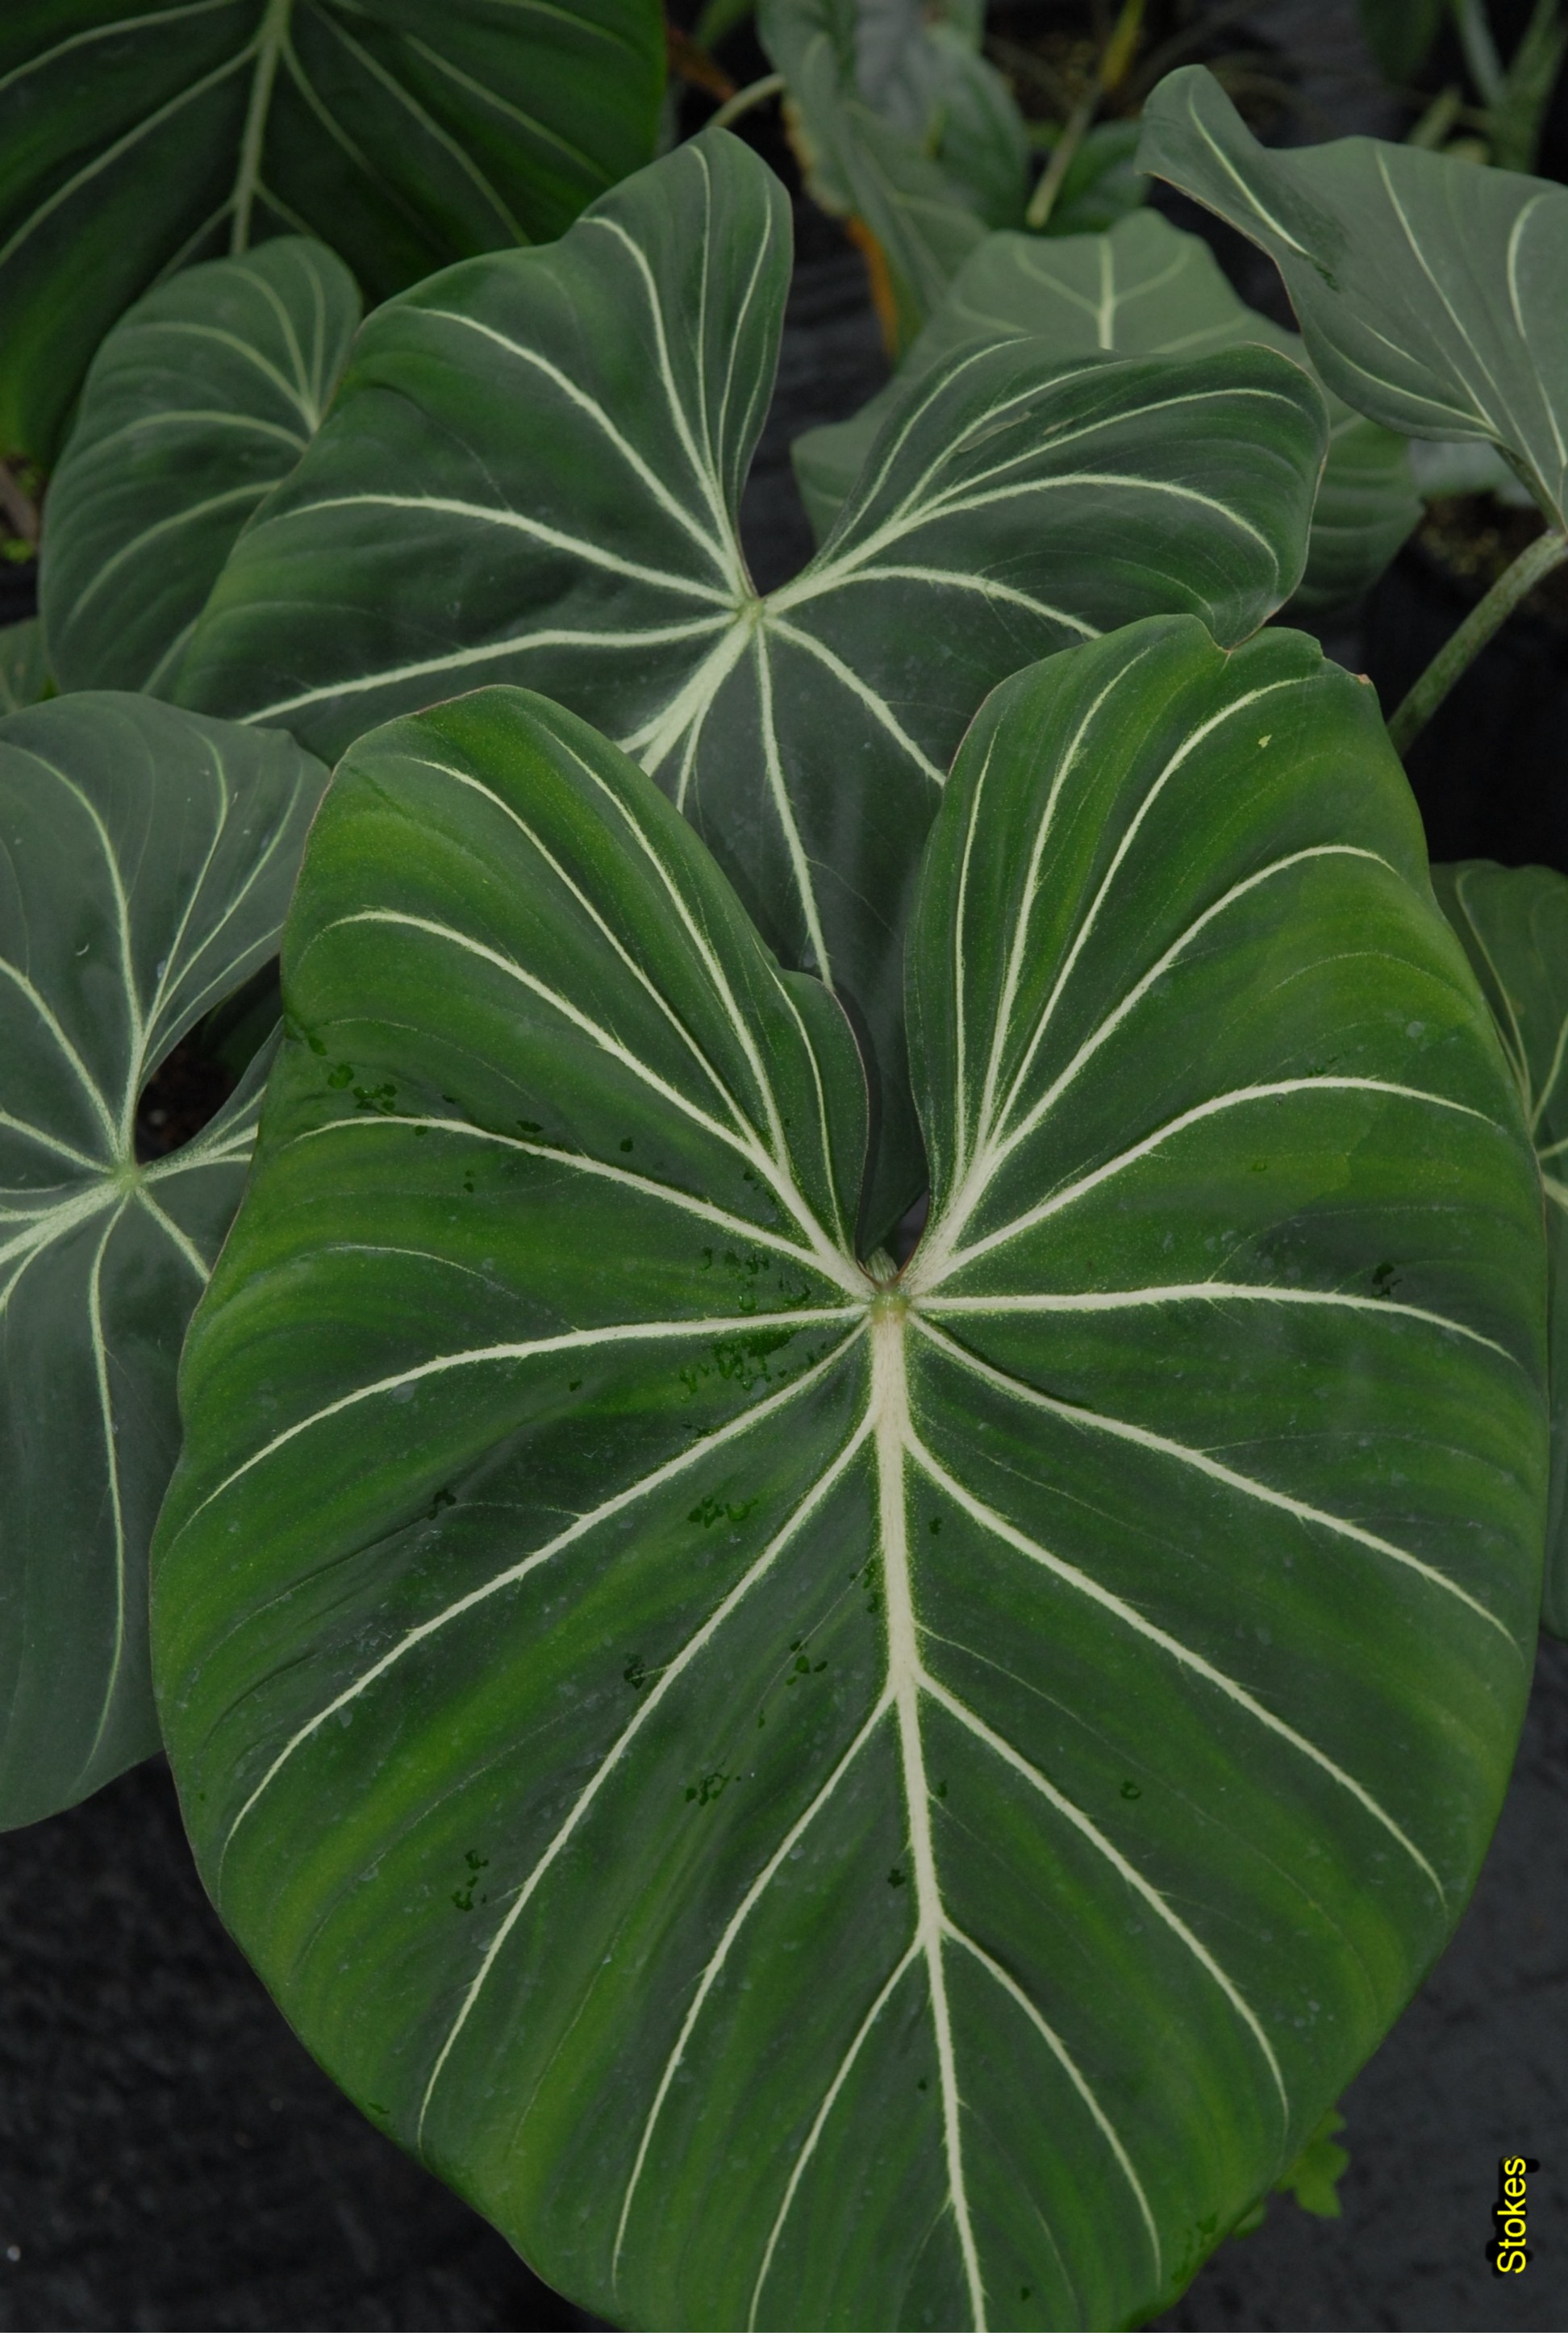 Online Plant Guide - Philodendron 'Gloriosum' / Gloriosum Philodendron